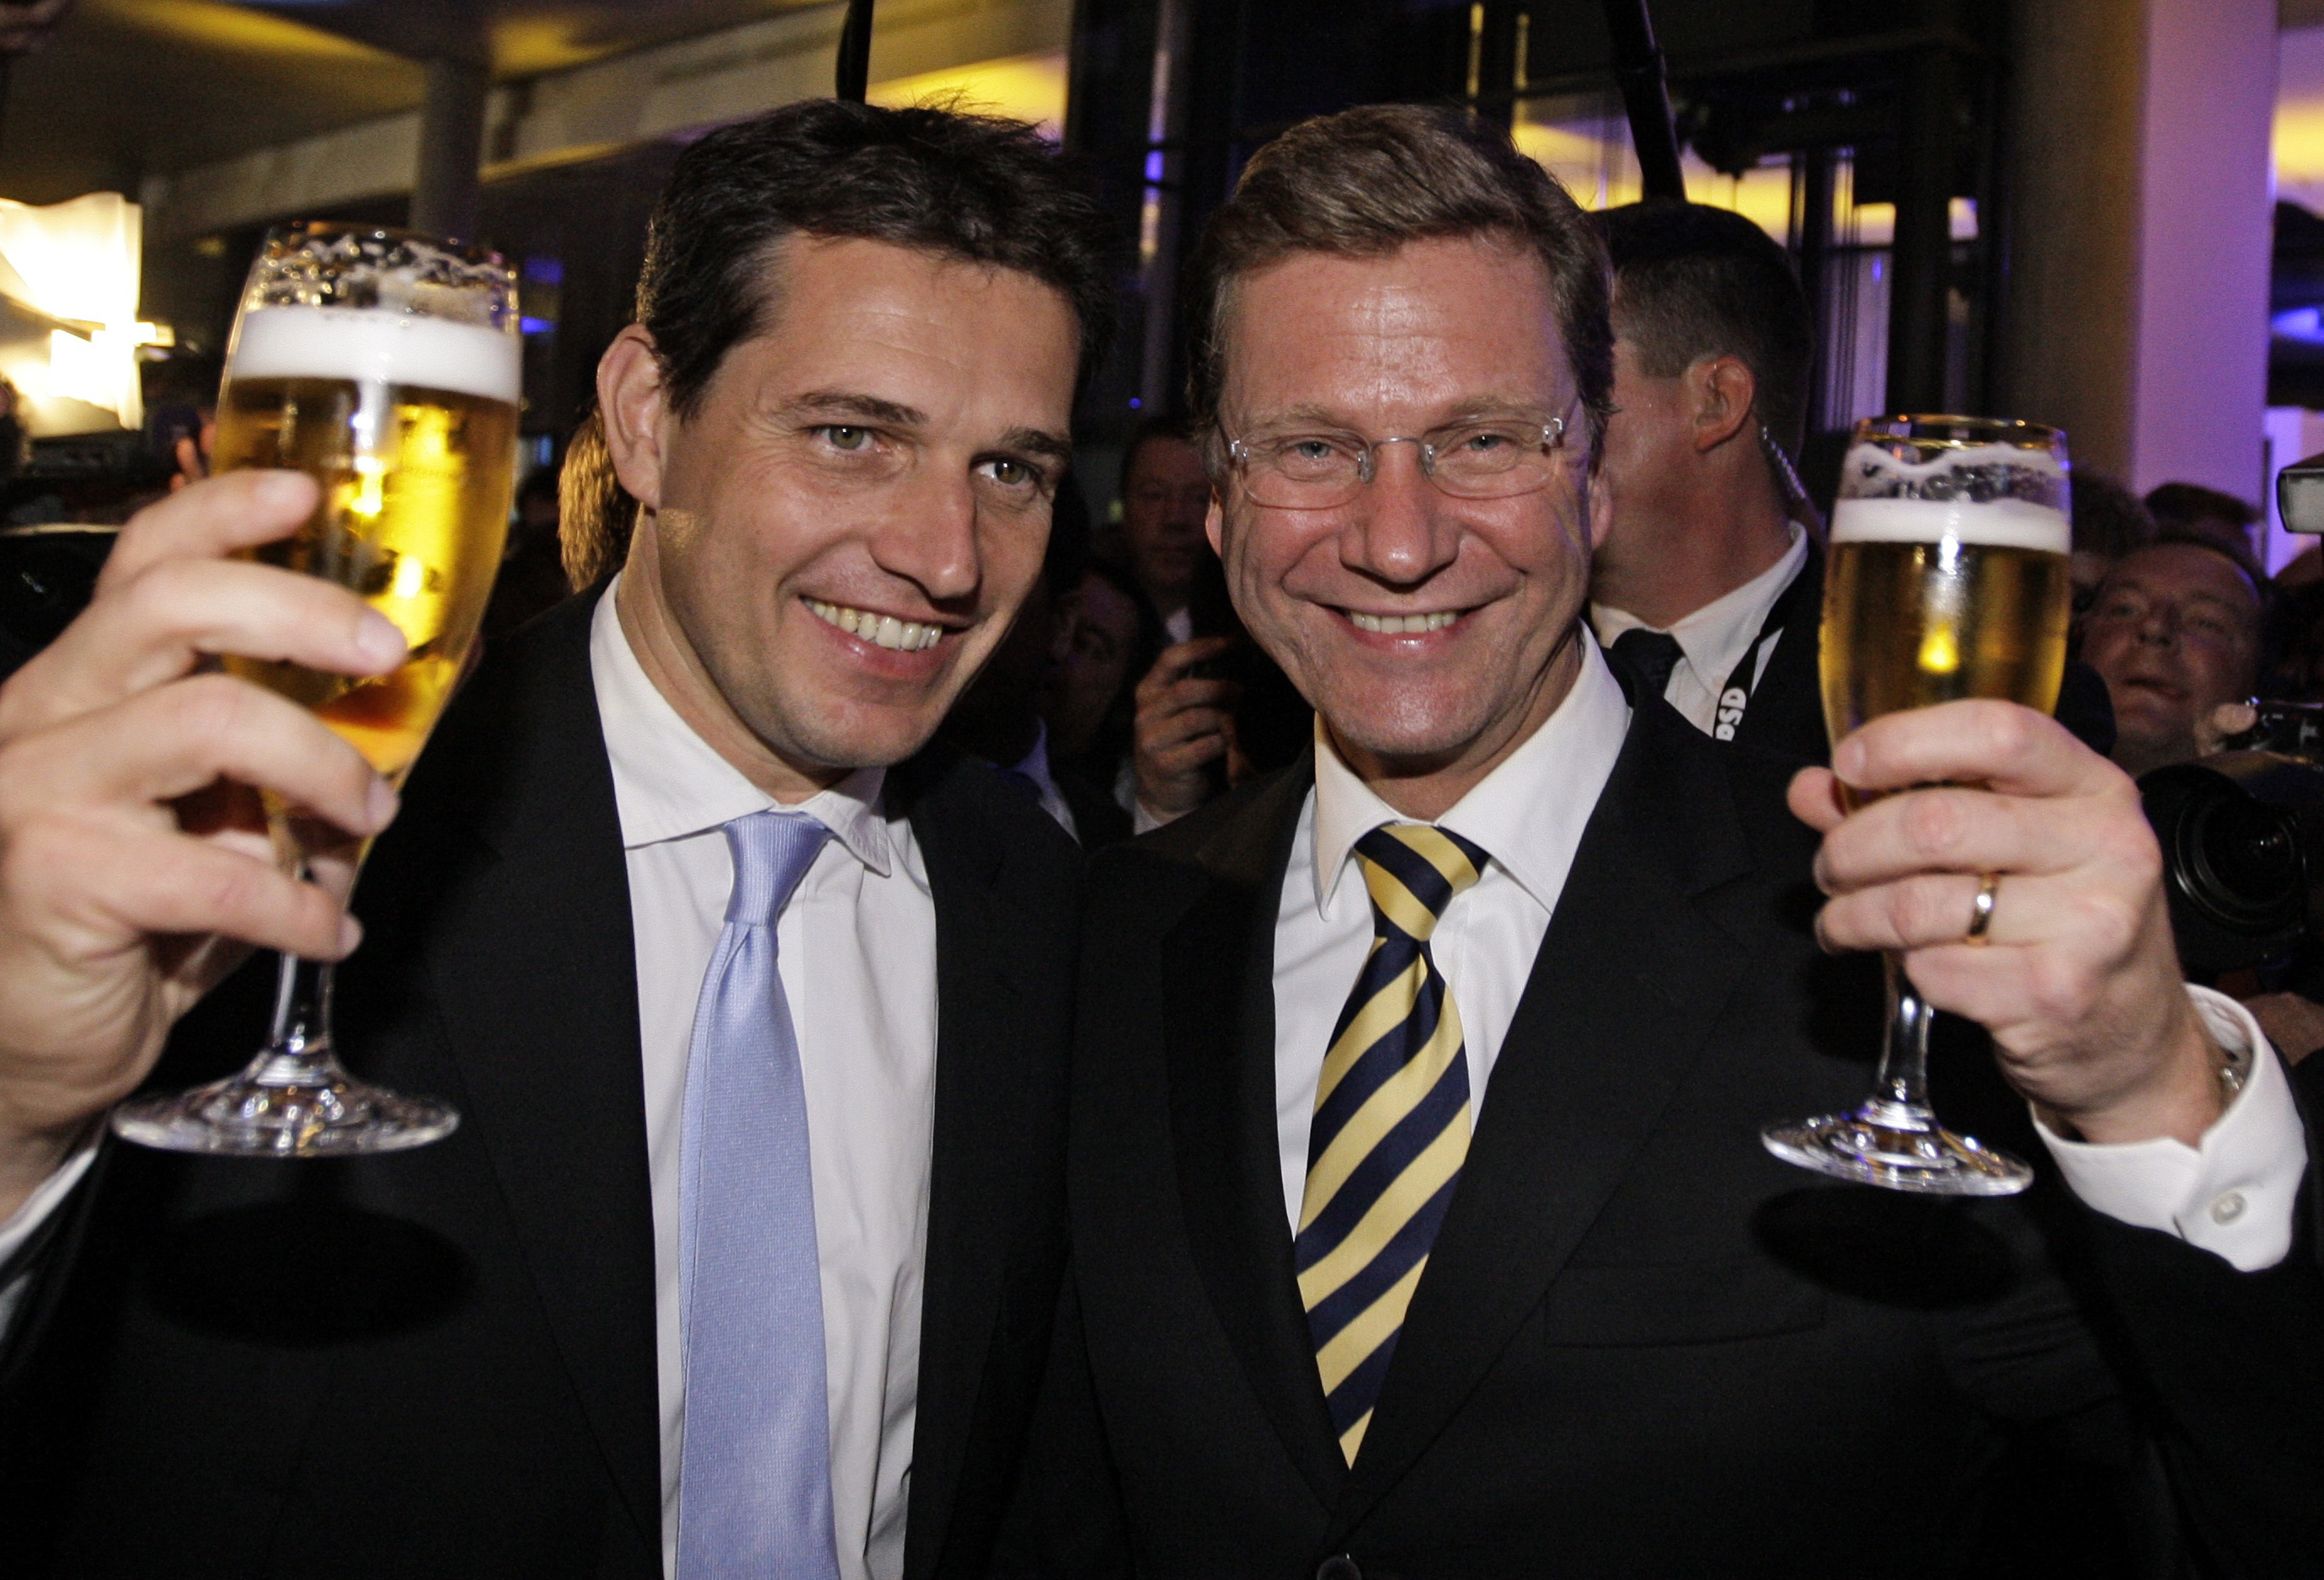 Guido Westerwelle (R), leader of the pro-business Free Democratic Party (FDP) and his partner Michael Mronz celebrate at the FDP venue after the German general election (Bundestagswahl) in Berlin September 27, 2009. German voters gave Chancellor Angela Merkel a second term in an election on Sunday and a mandate to form a new government with the business-friendly Free Democrats (FDP) that is expected to cut taxes to boost growth.  REUTERS/Thomas Bohlen  (GERMANY)